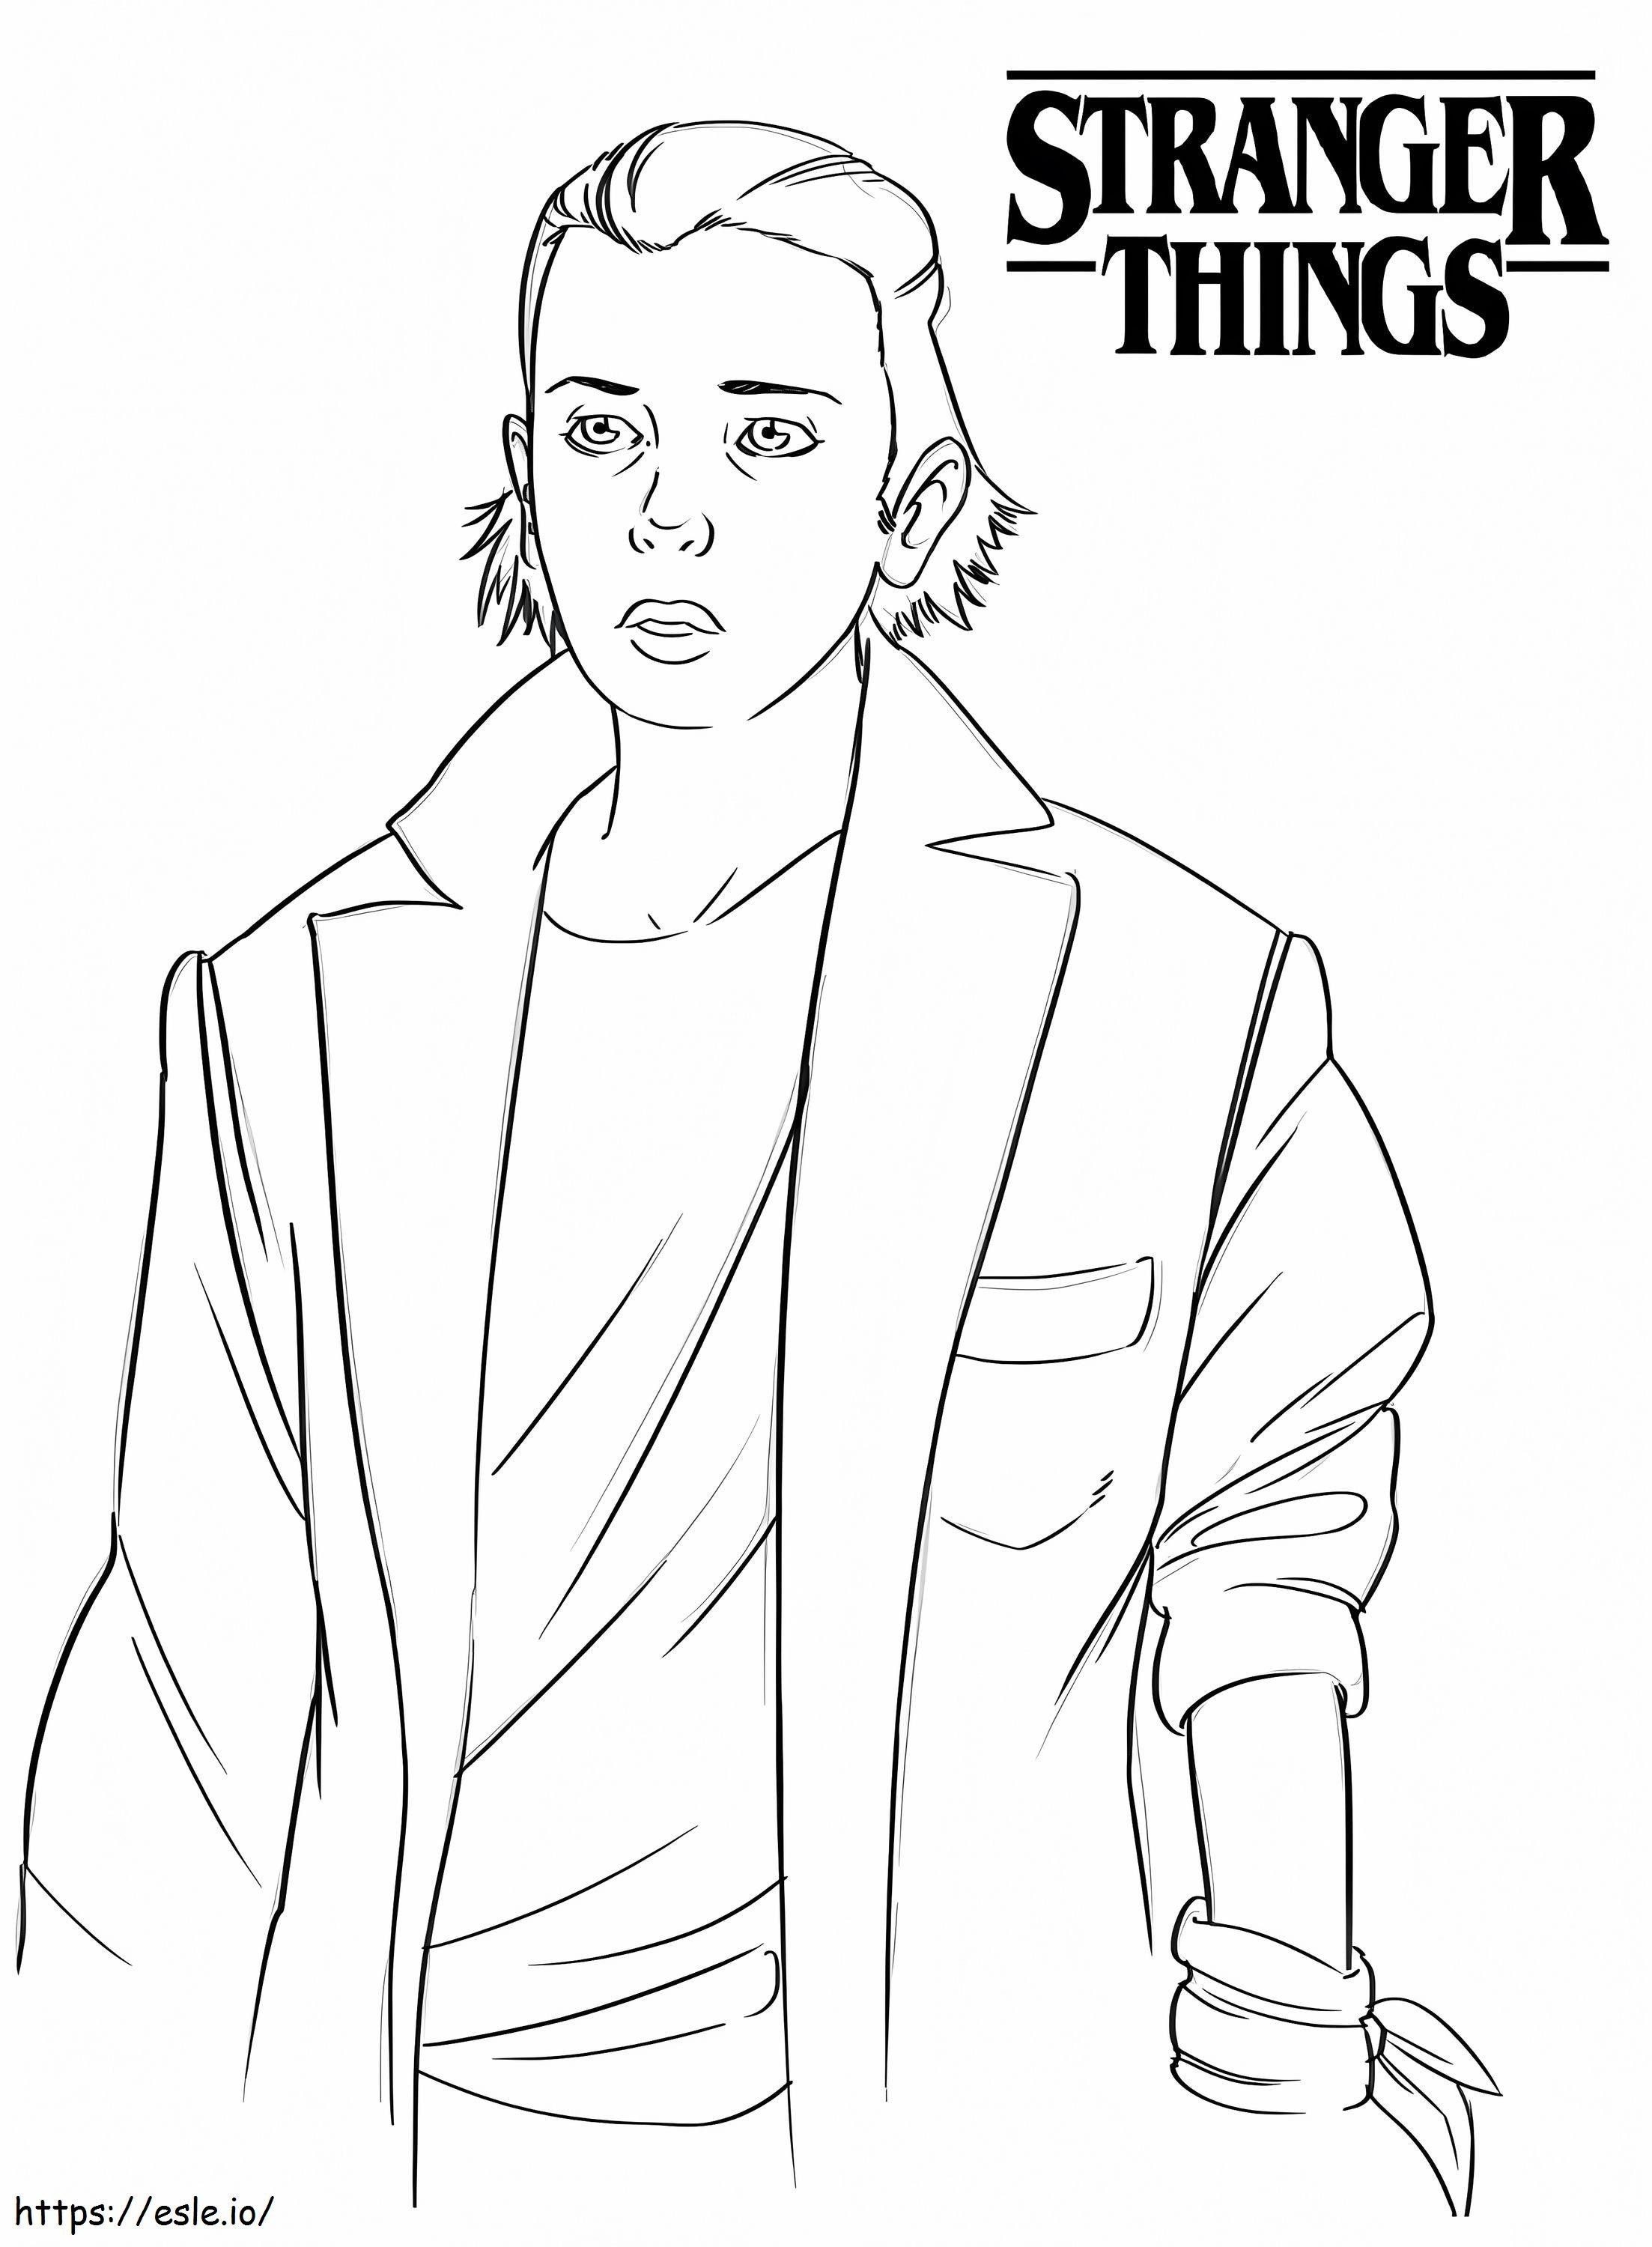 Eleven Stranger Things Coloring Page coloring page